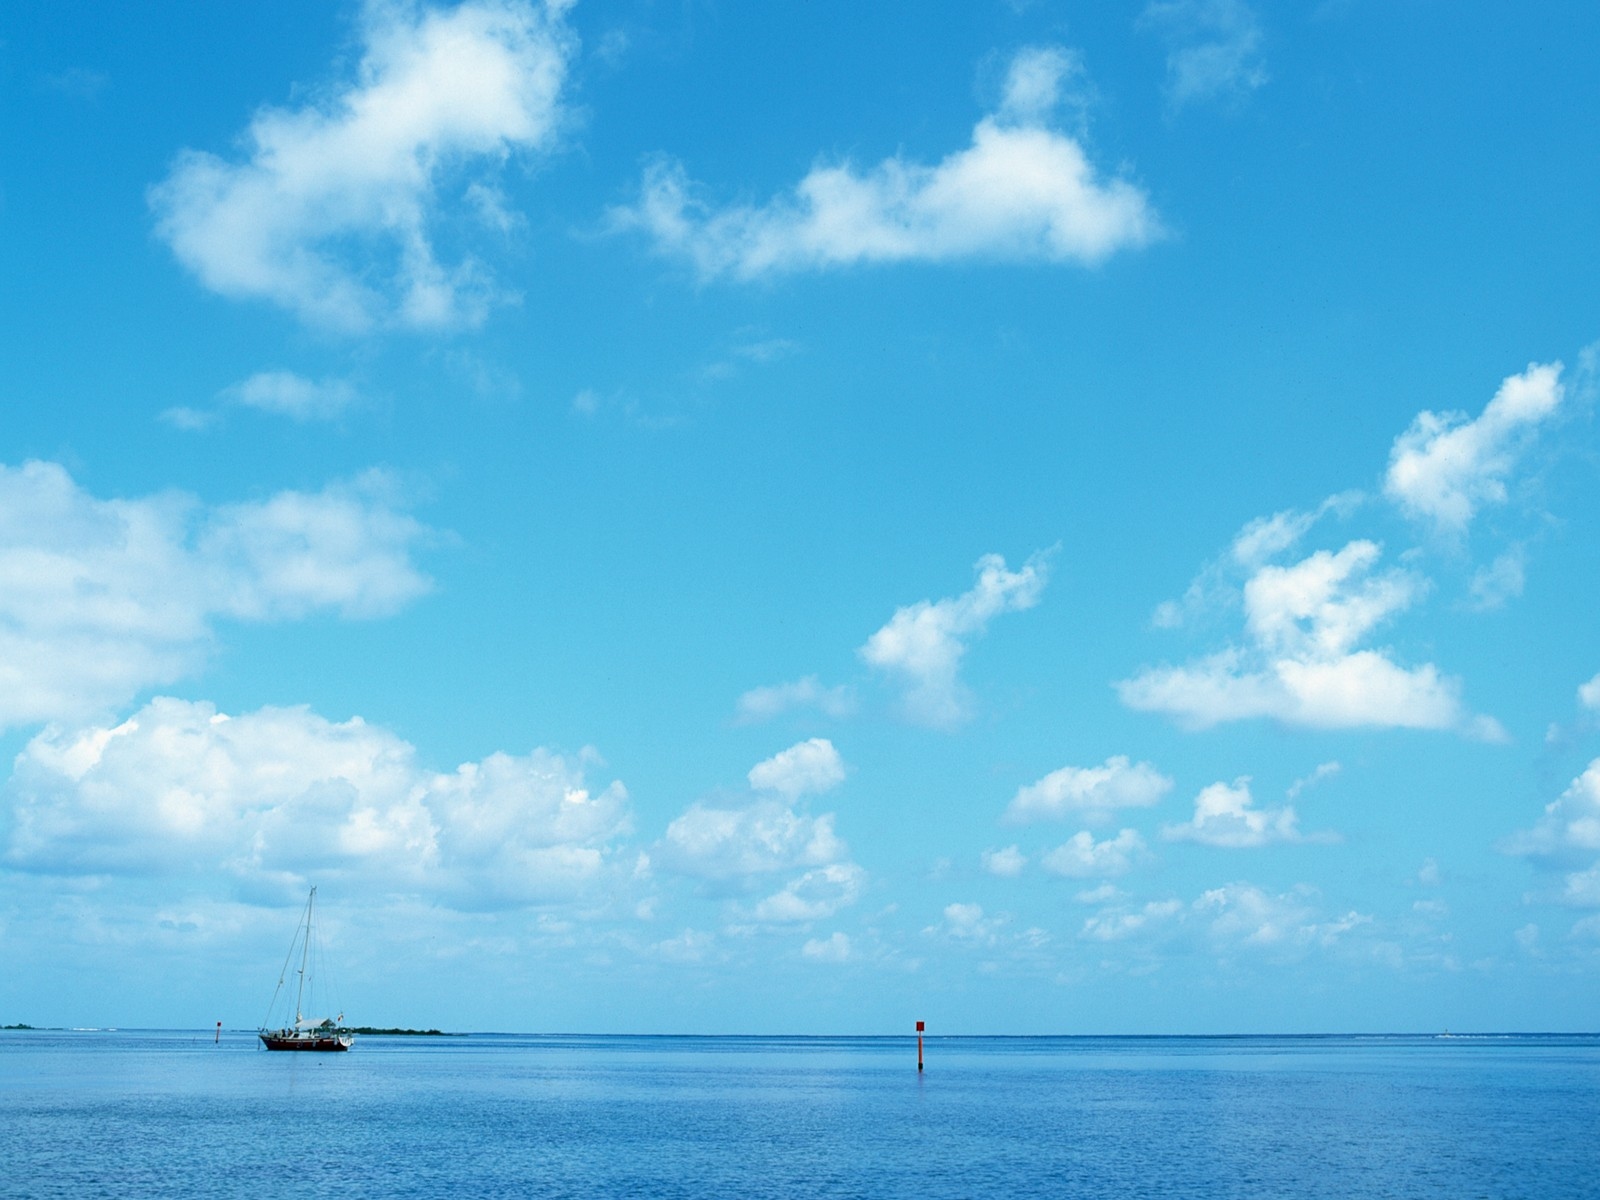 Hd 1600x1200 Sea And Clouds Desktop Wallpapers Backgrounds 1600x1200